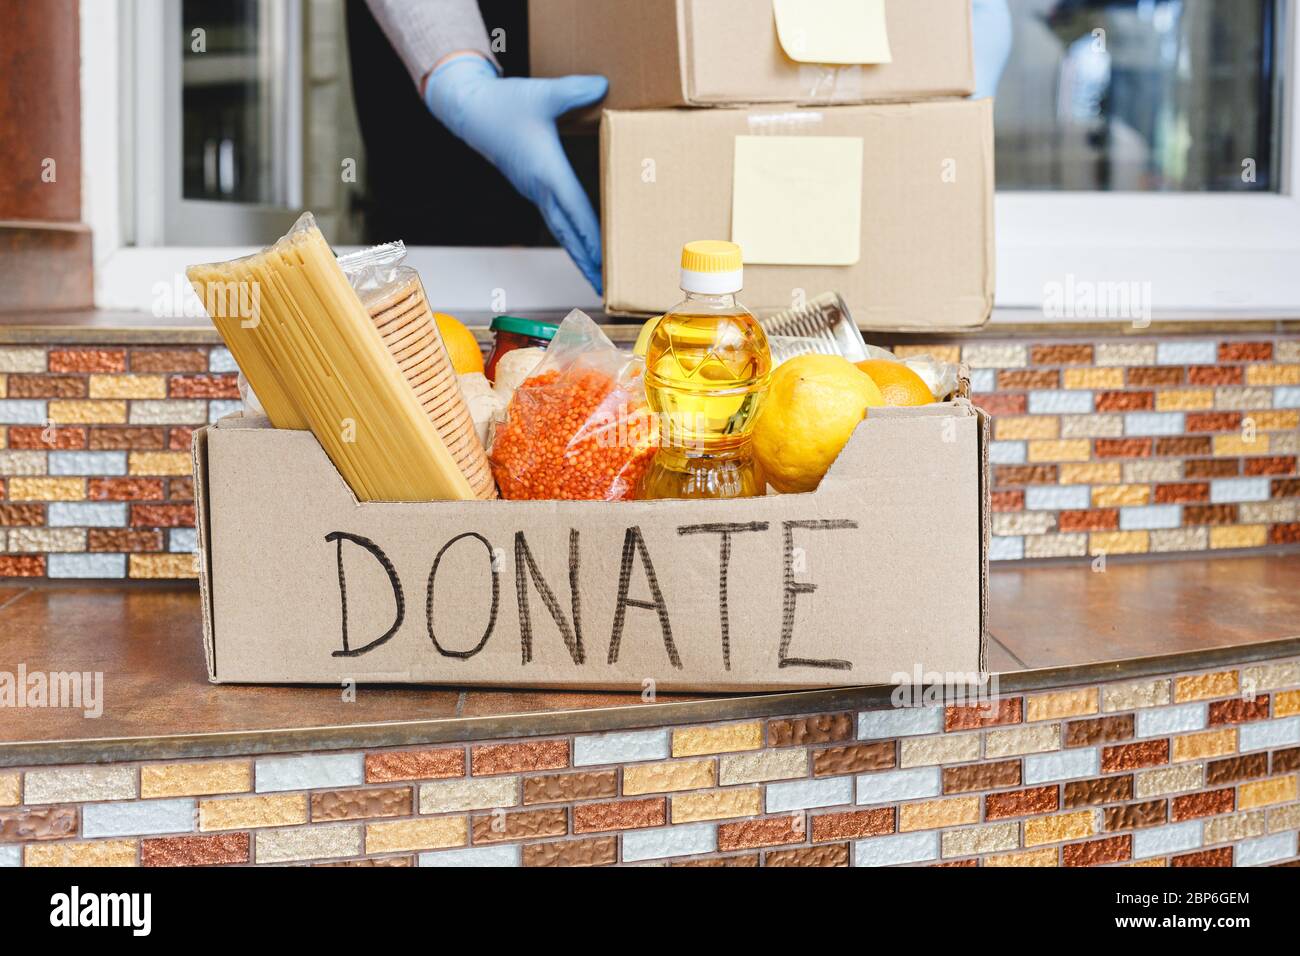 Donation box with food on doorstep near home door. Delivery mail boxes in female hands. Woman in protective gloves holding Delivery box. Contactless Stock Photo